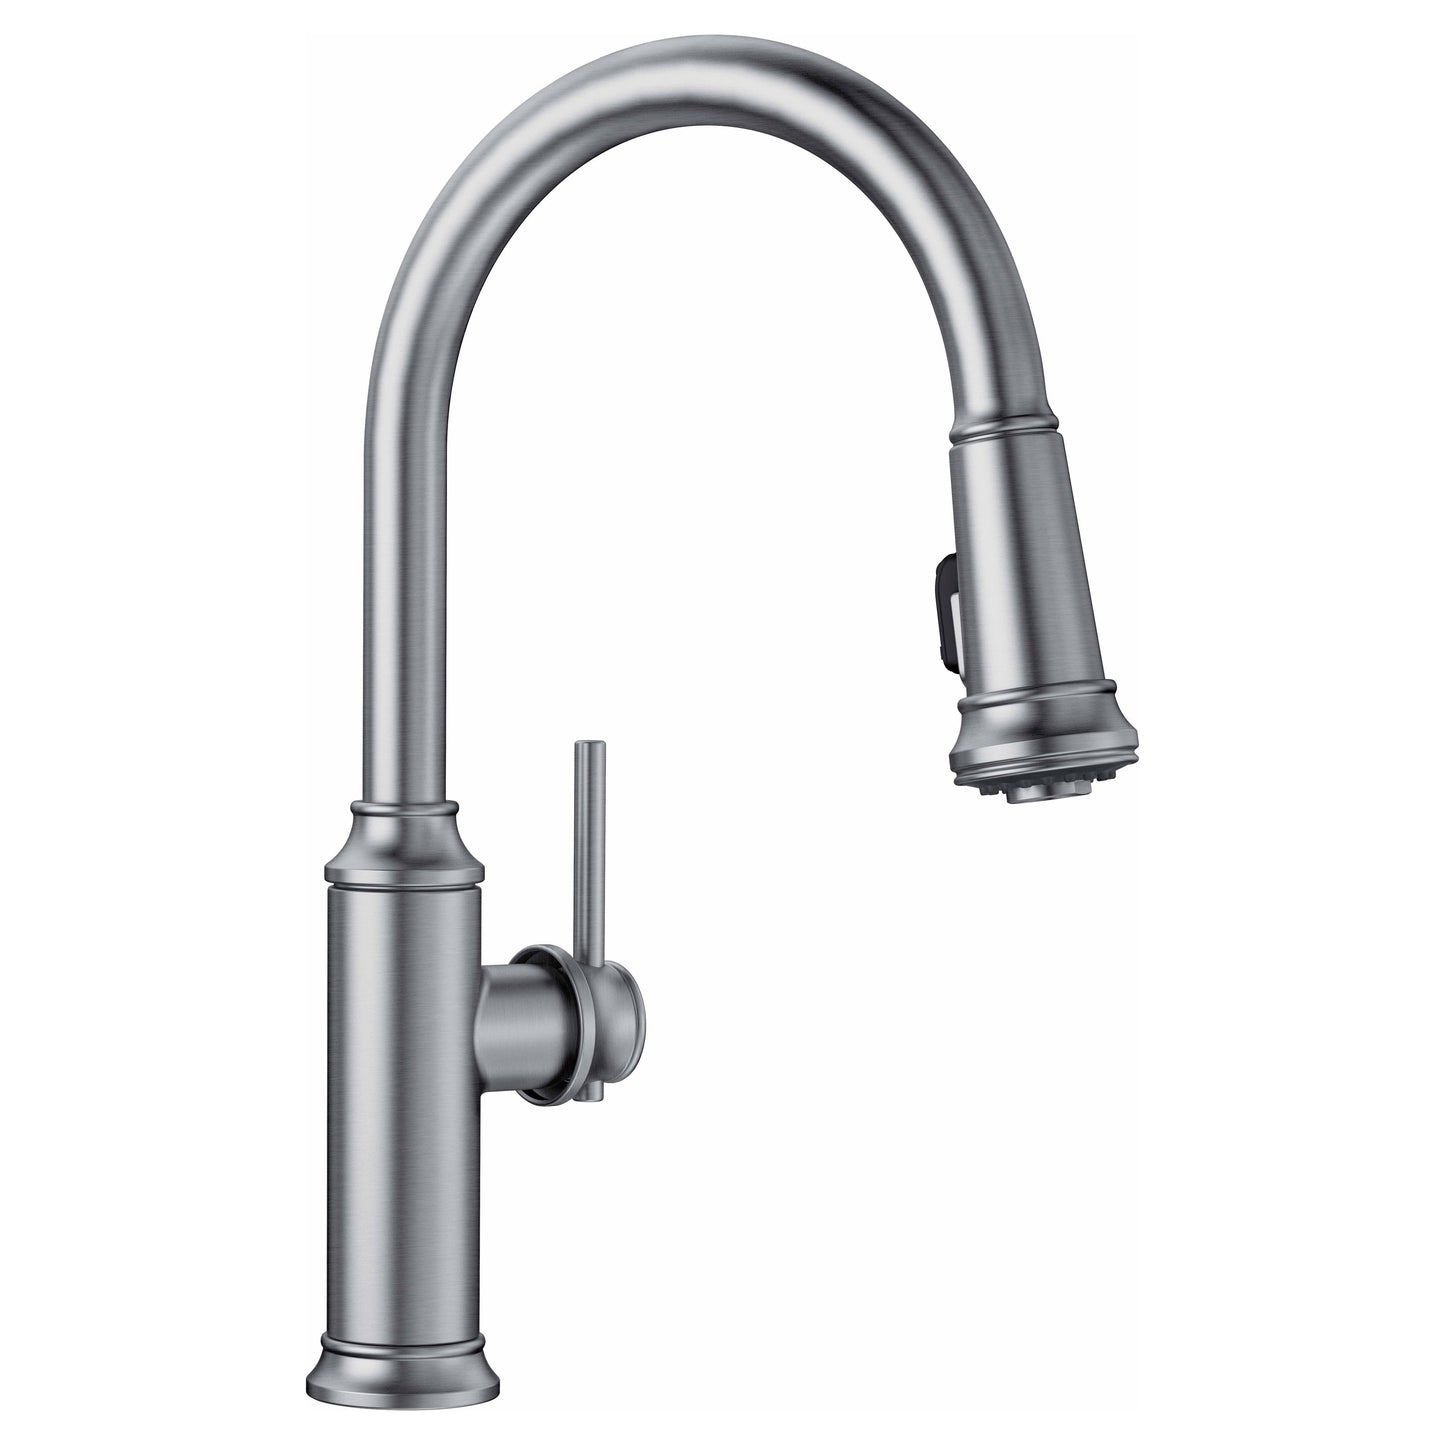 Empressa High Arc Pull-Down Dual Spray Kitchen Faucet 1.5 gpm - Stainless